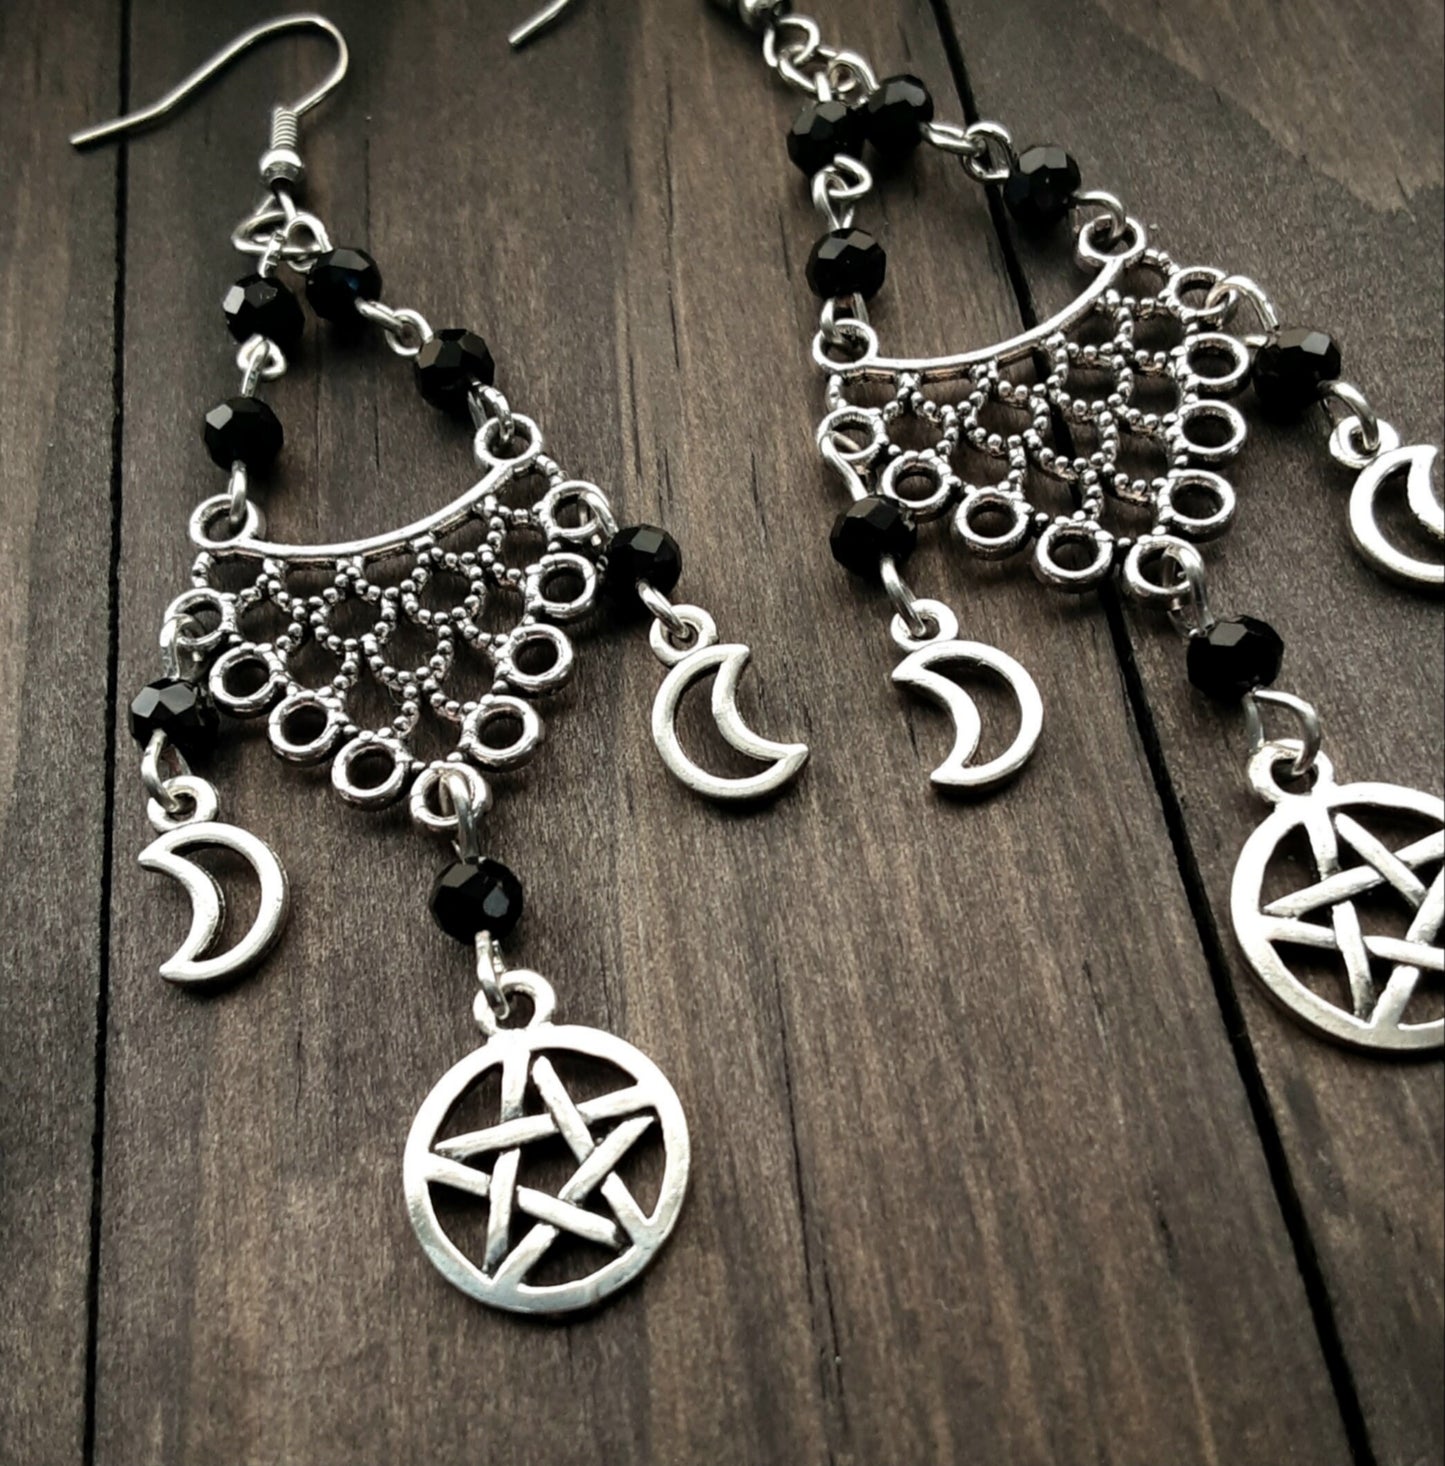 Hekate earrings Pentacle and crescent moon chandelier earrings Witchy Vibes